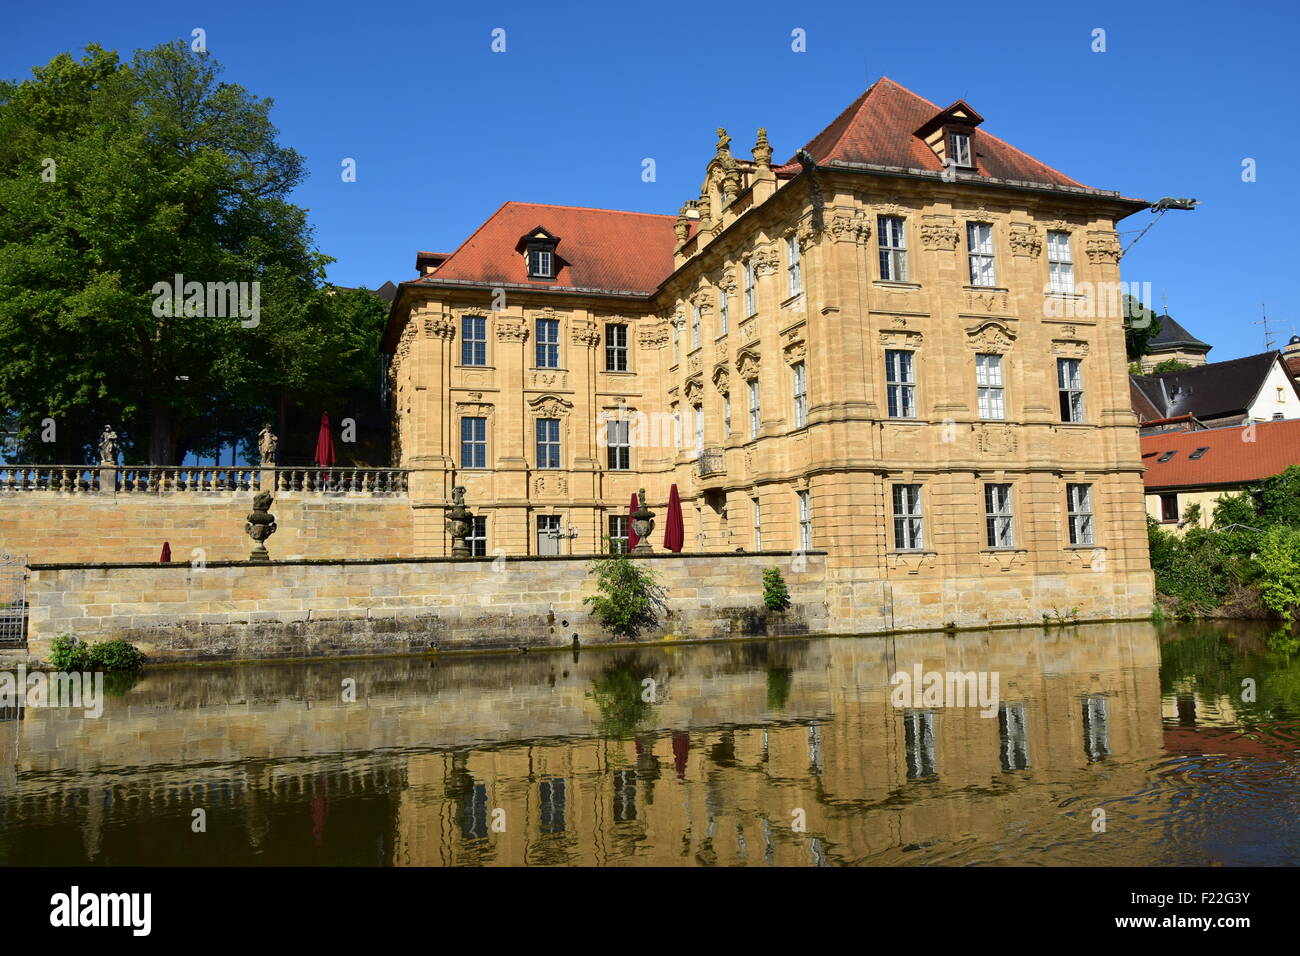 Villa germany hi-res Alamy stock images photography Page - - and 11